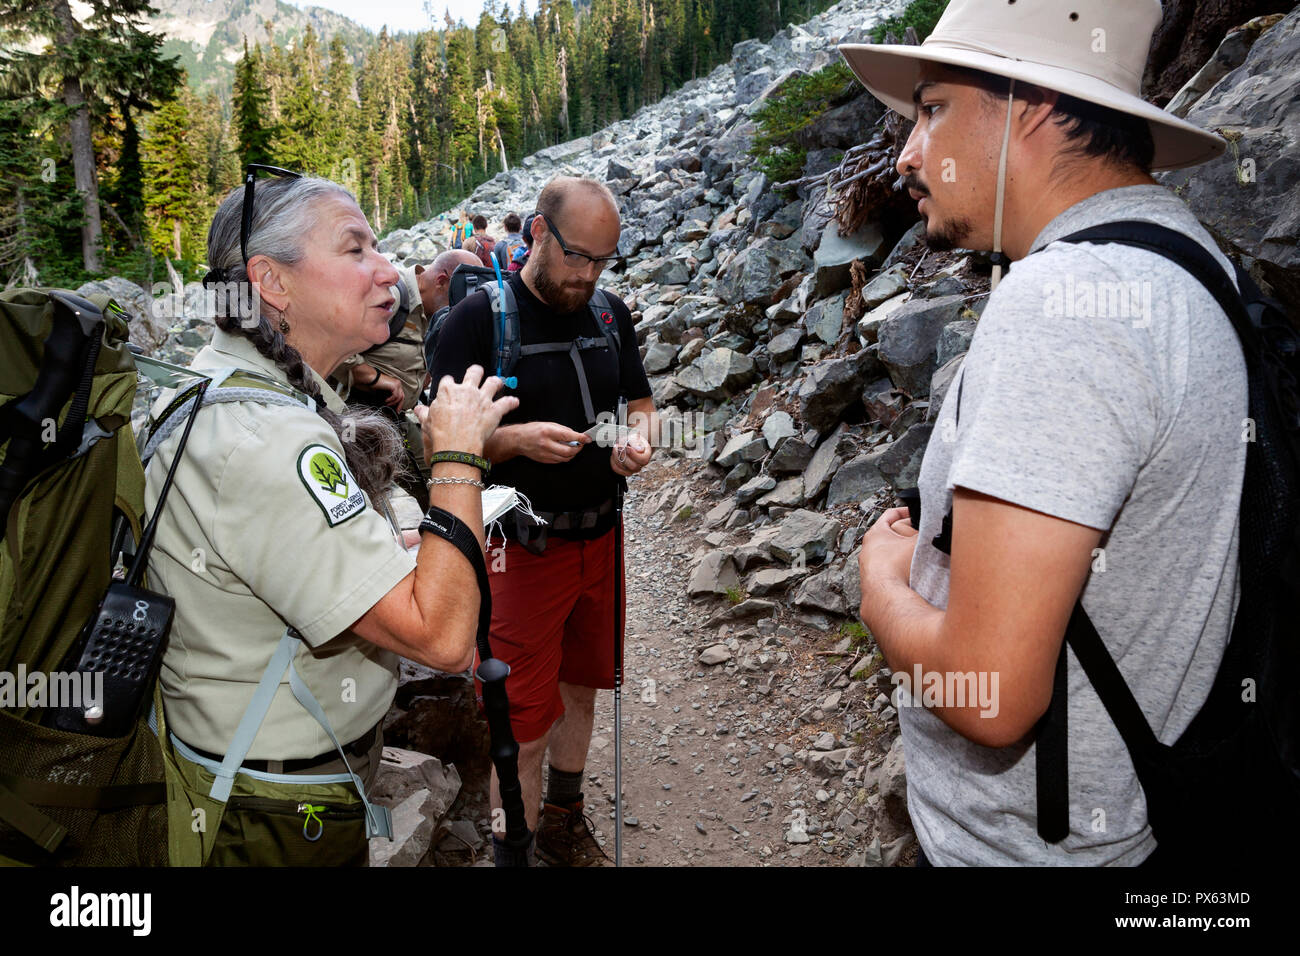 WA14849-00...WASHINGTON - Forest Service Volunteer Jane-Ellen talkes with hikers about filling out a wilderness permit on the Snow Lakes Trail in the  Stock Photo